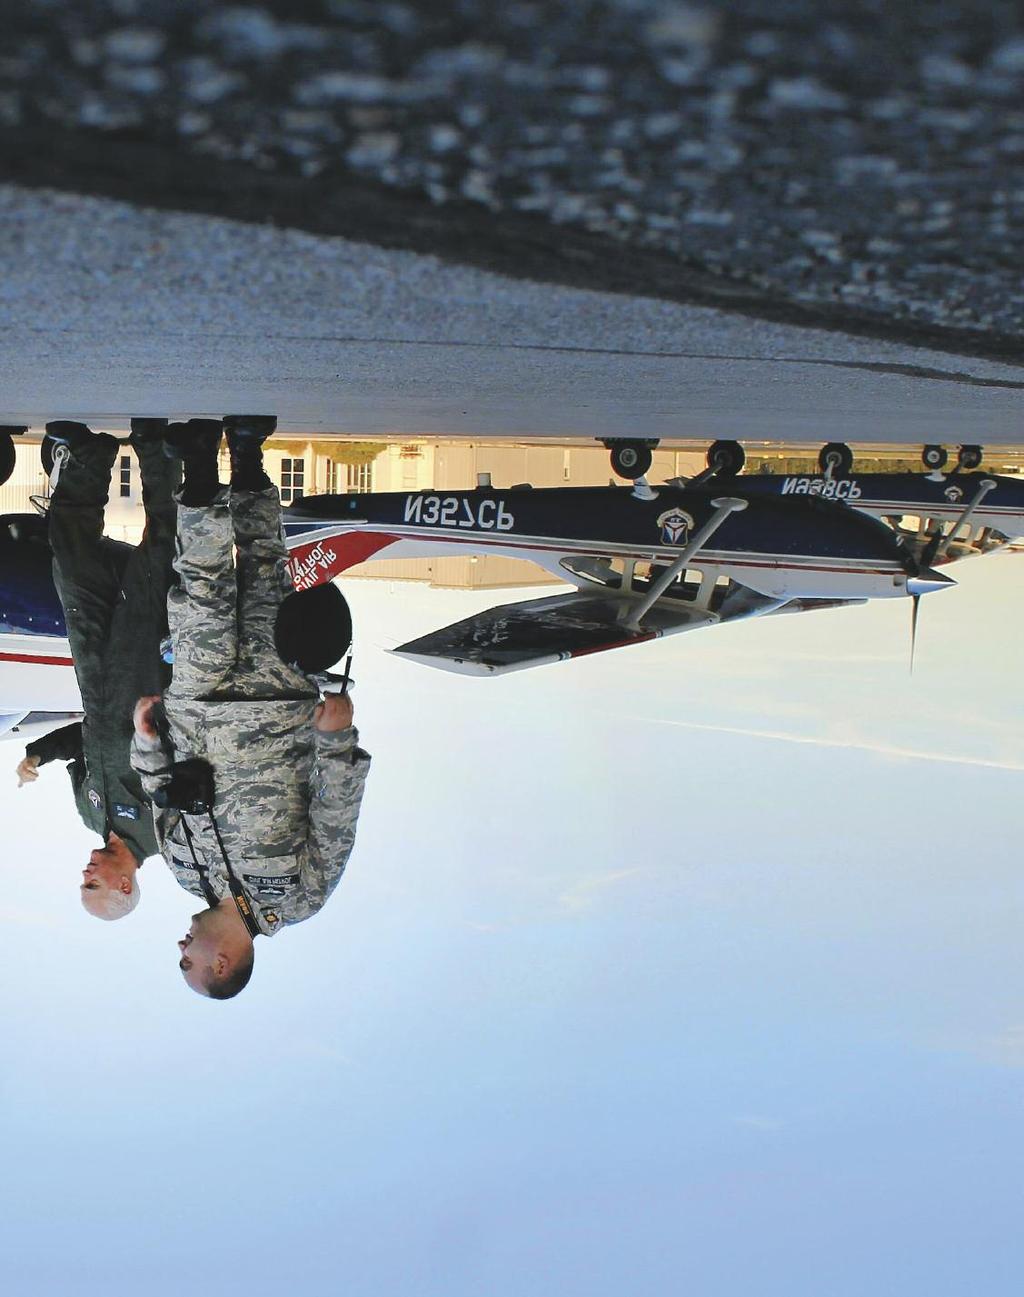 Inspiring Success through M I SS I O N S Civil Air Patrol s services are performed in the air and on the